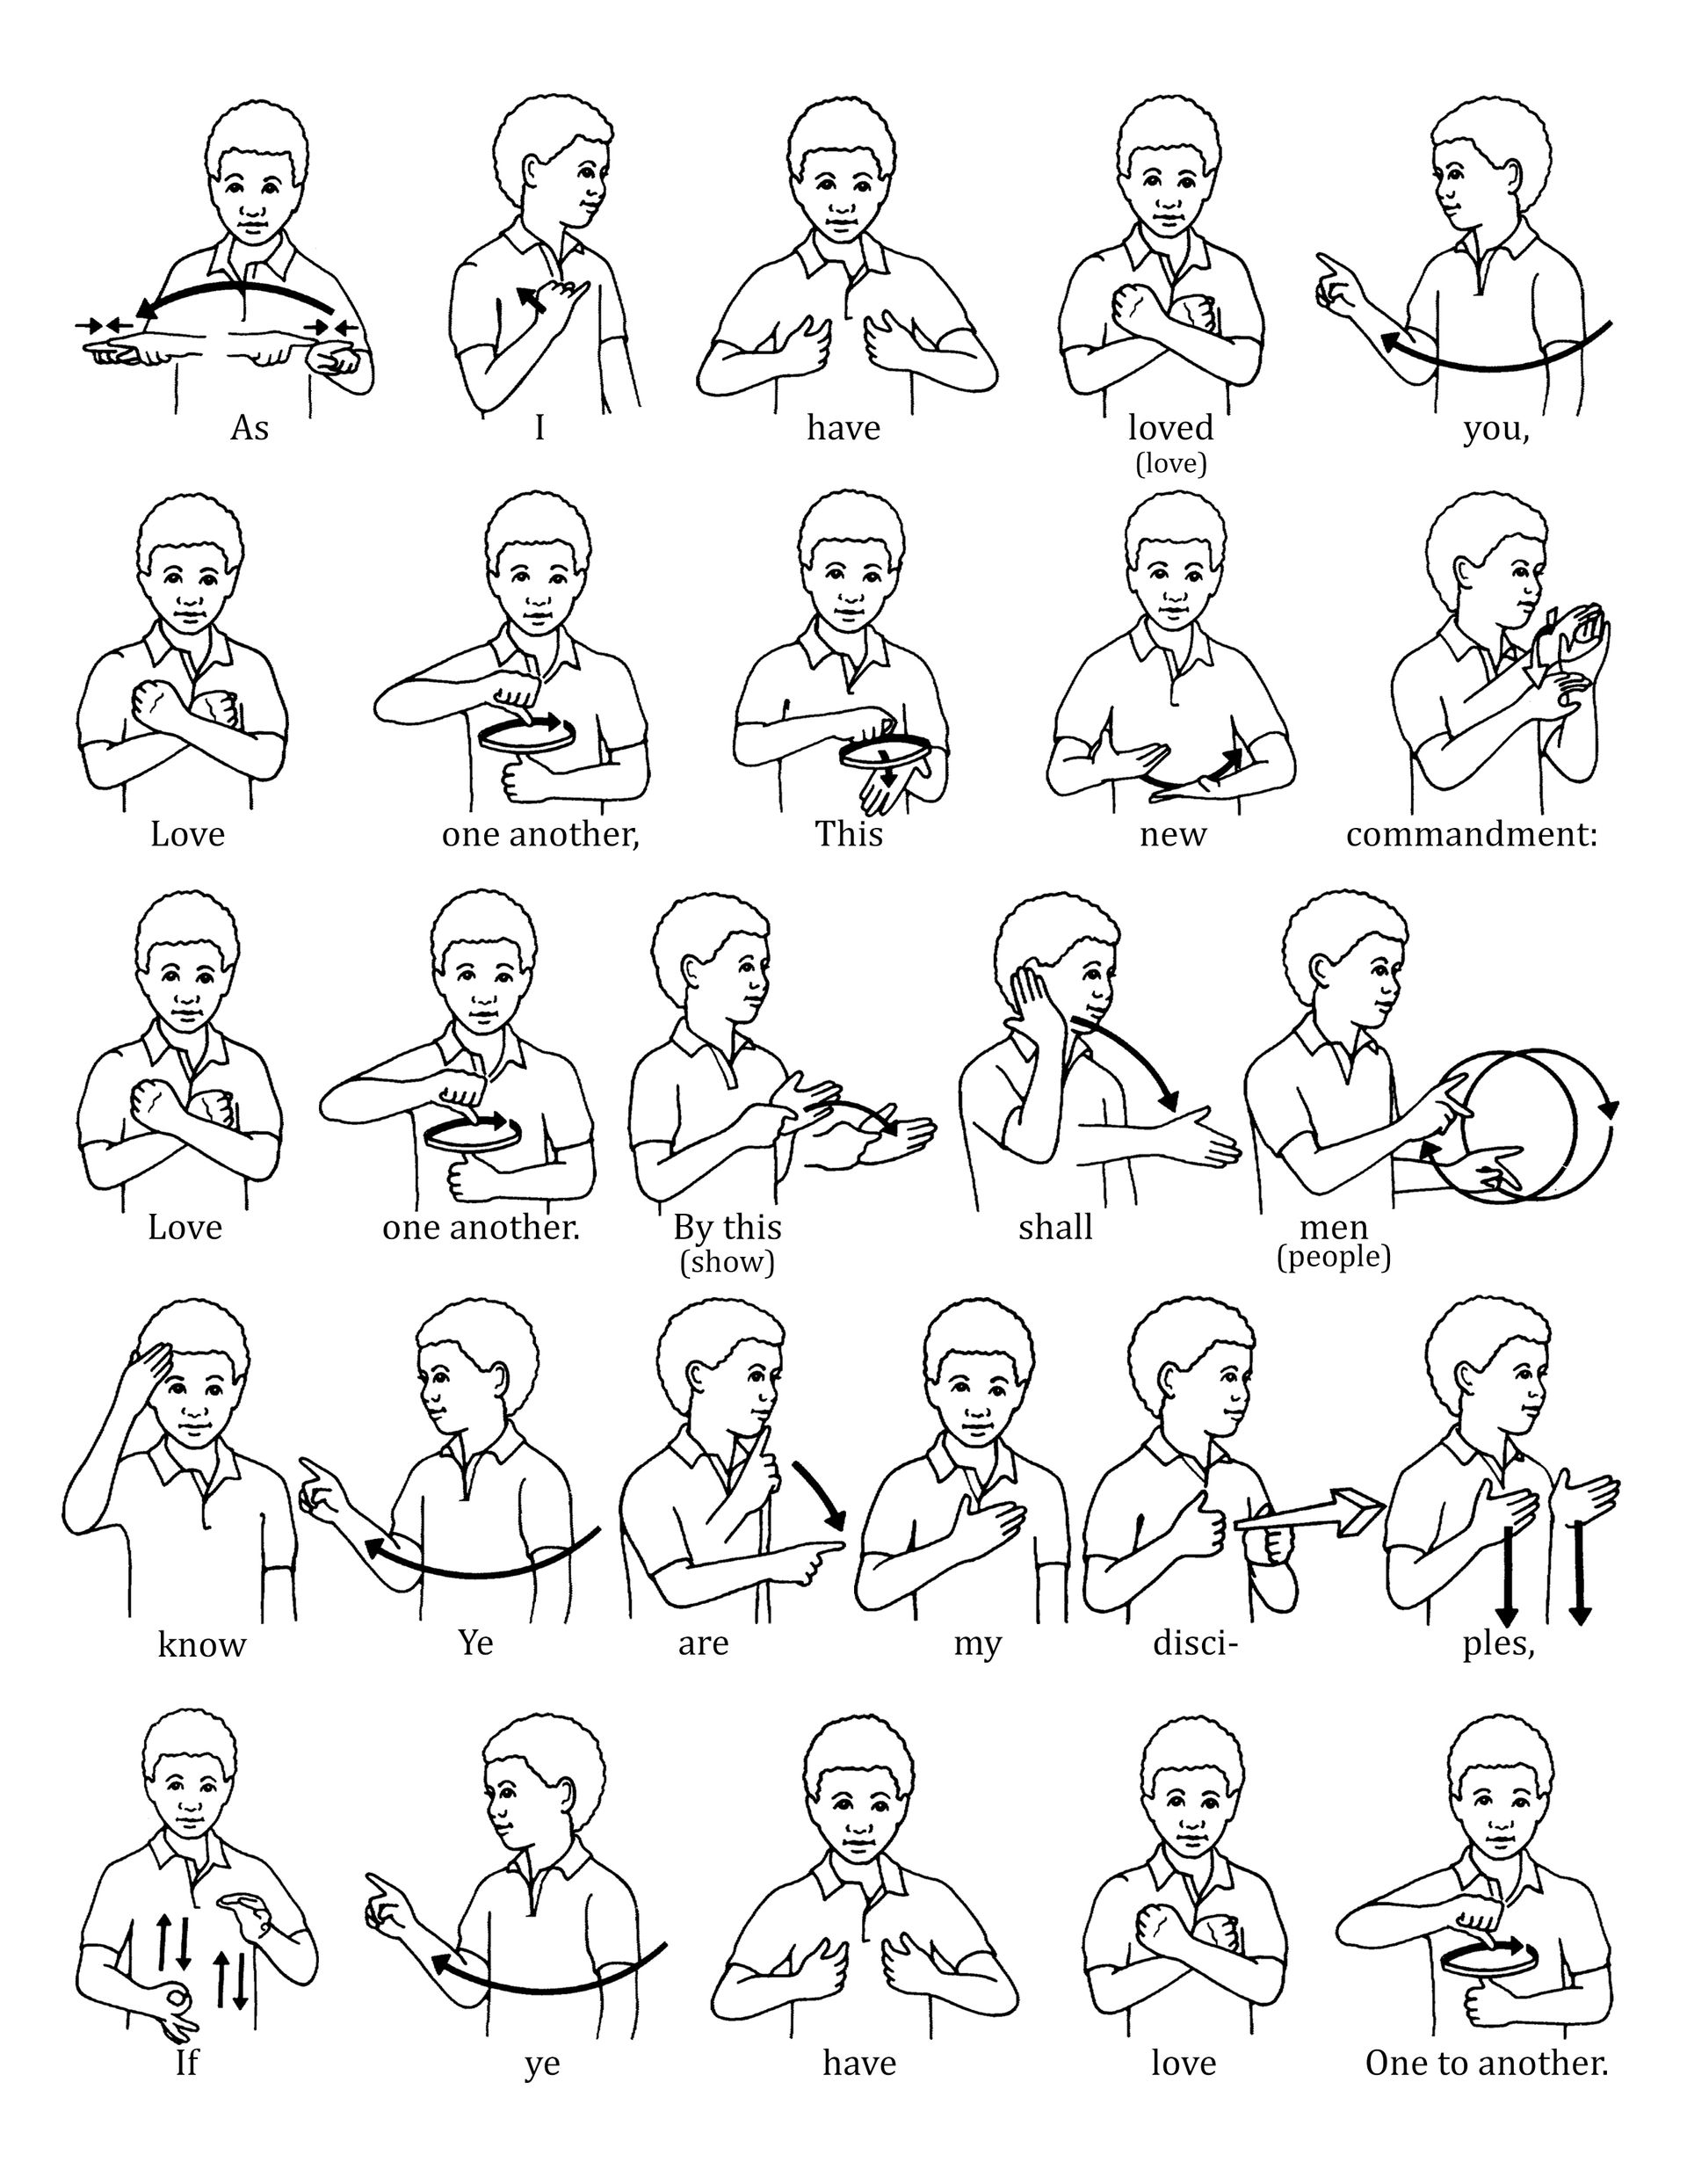 How To Learn Sign Language And How Long Does It Take?